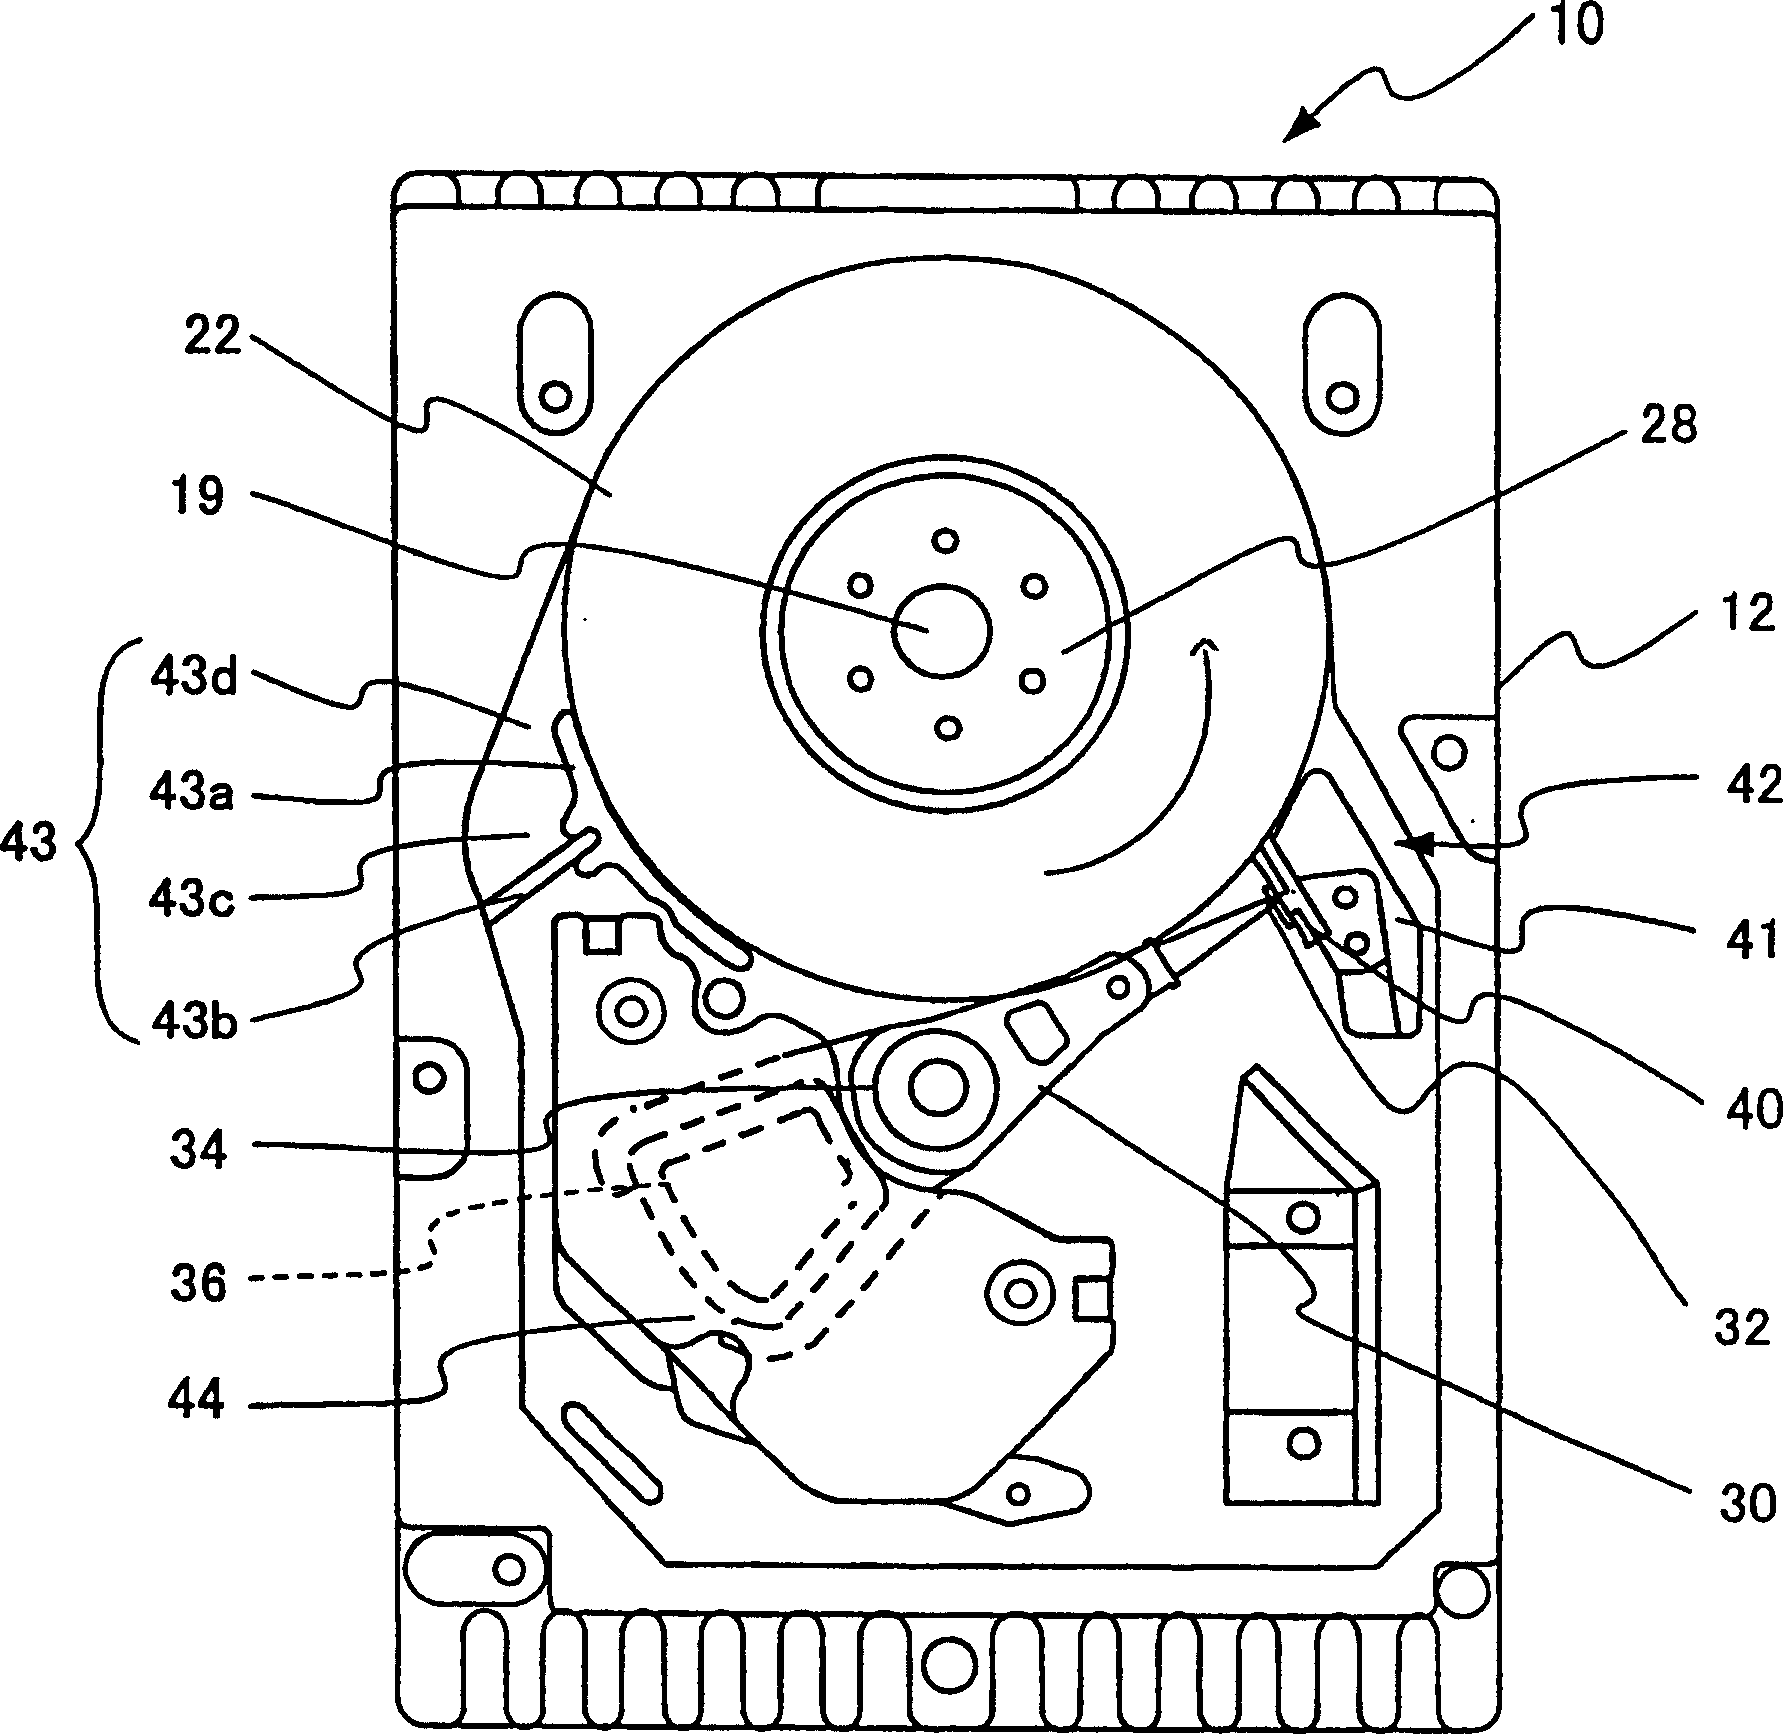 Disc drive, rigid disc drive and casing for rigid disc drive